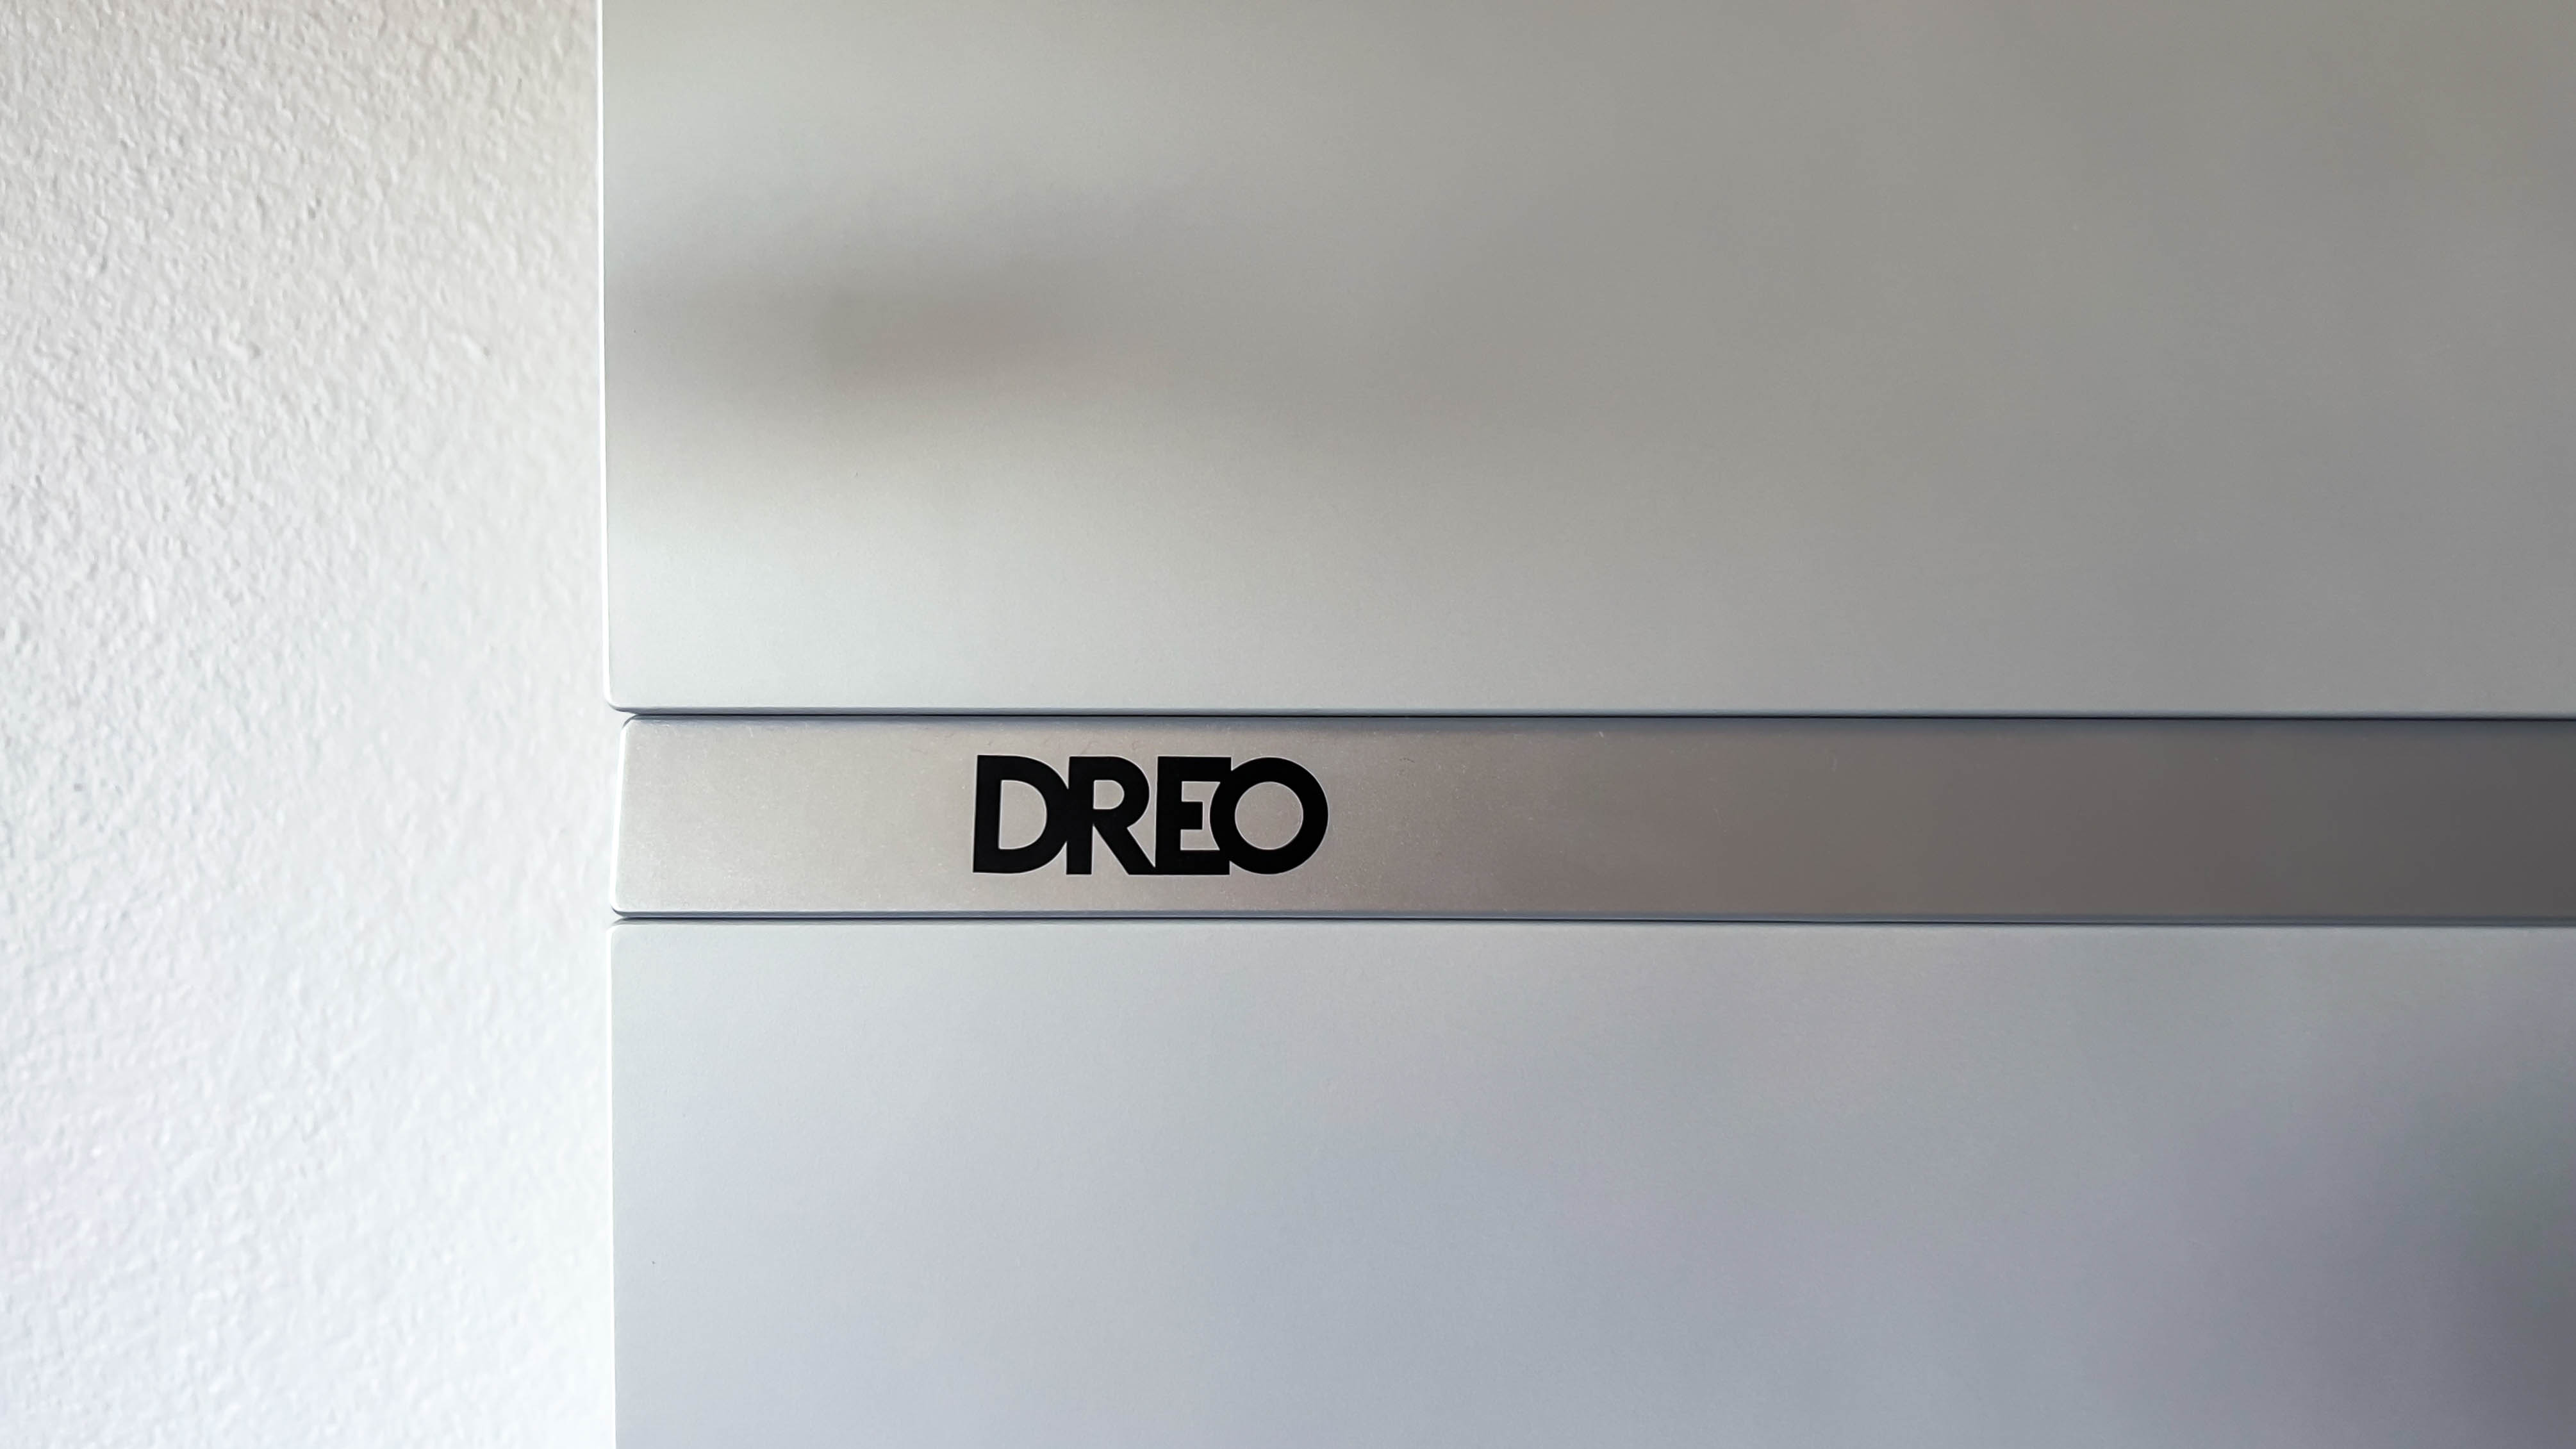 Dreo Smart Wall Heater WH719S during testing